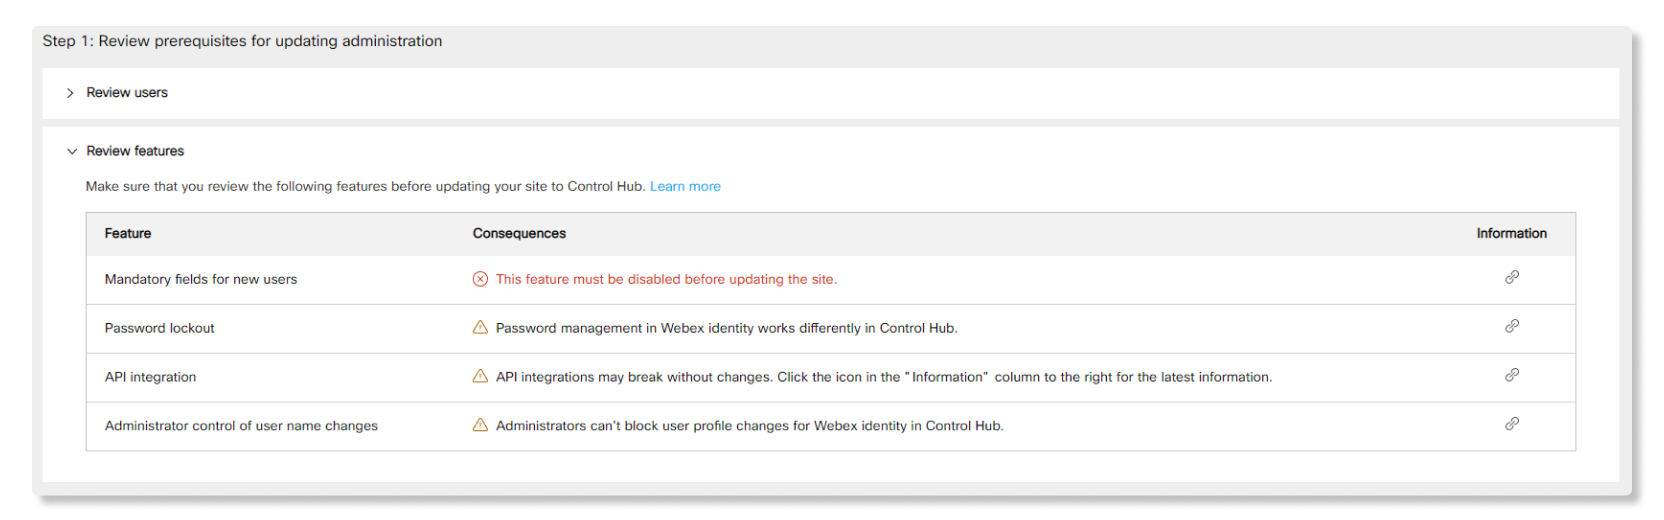 Review features UI for updating administration in Site Admin